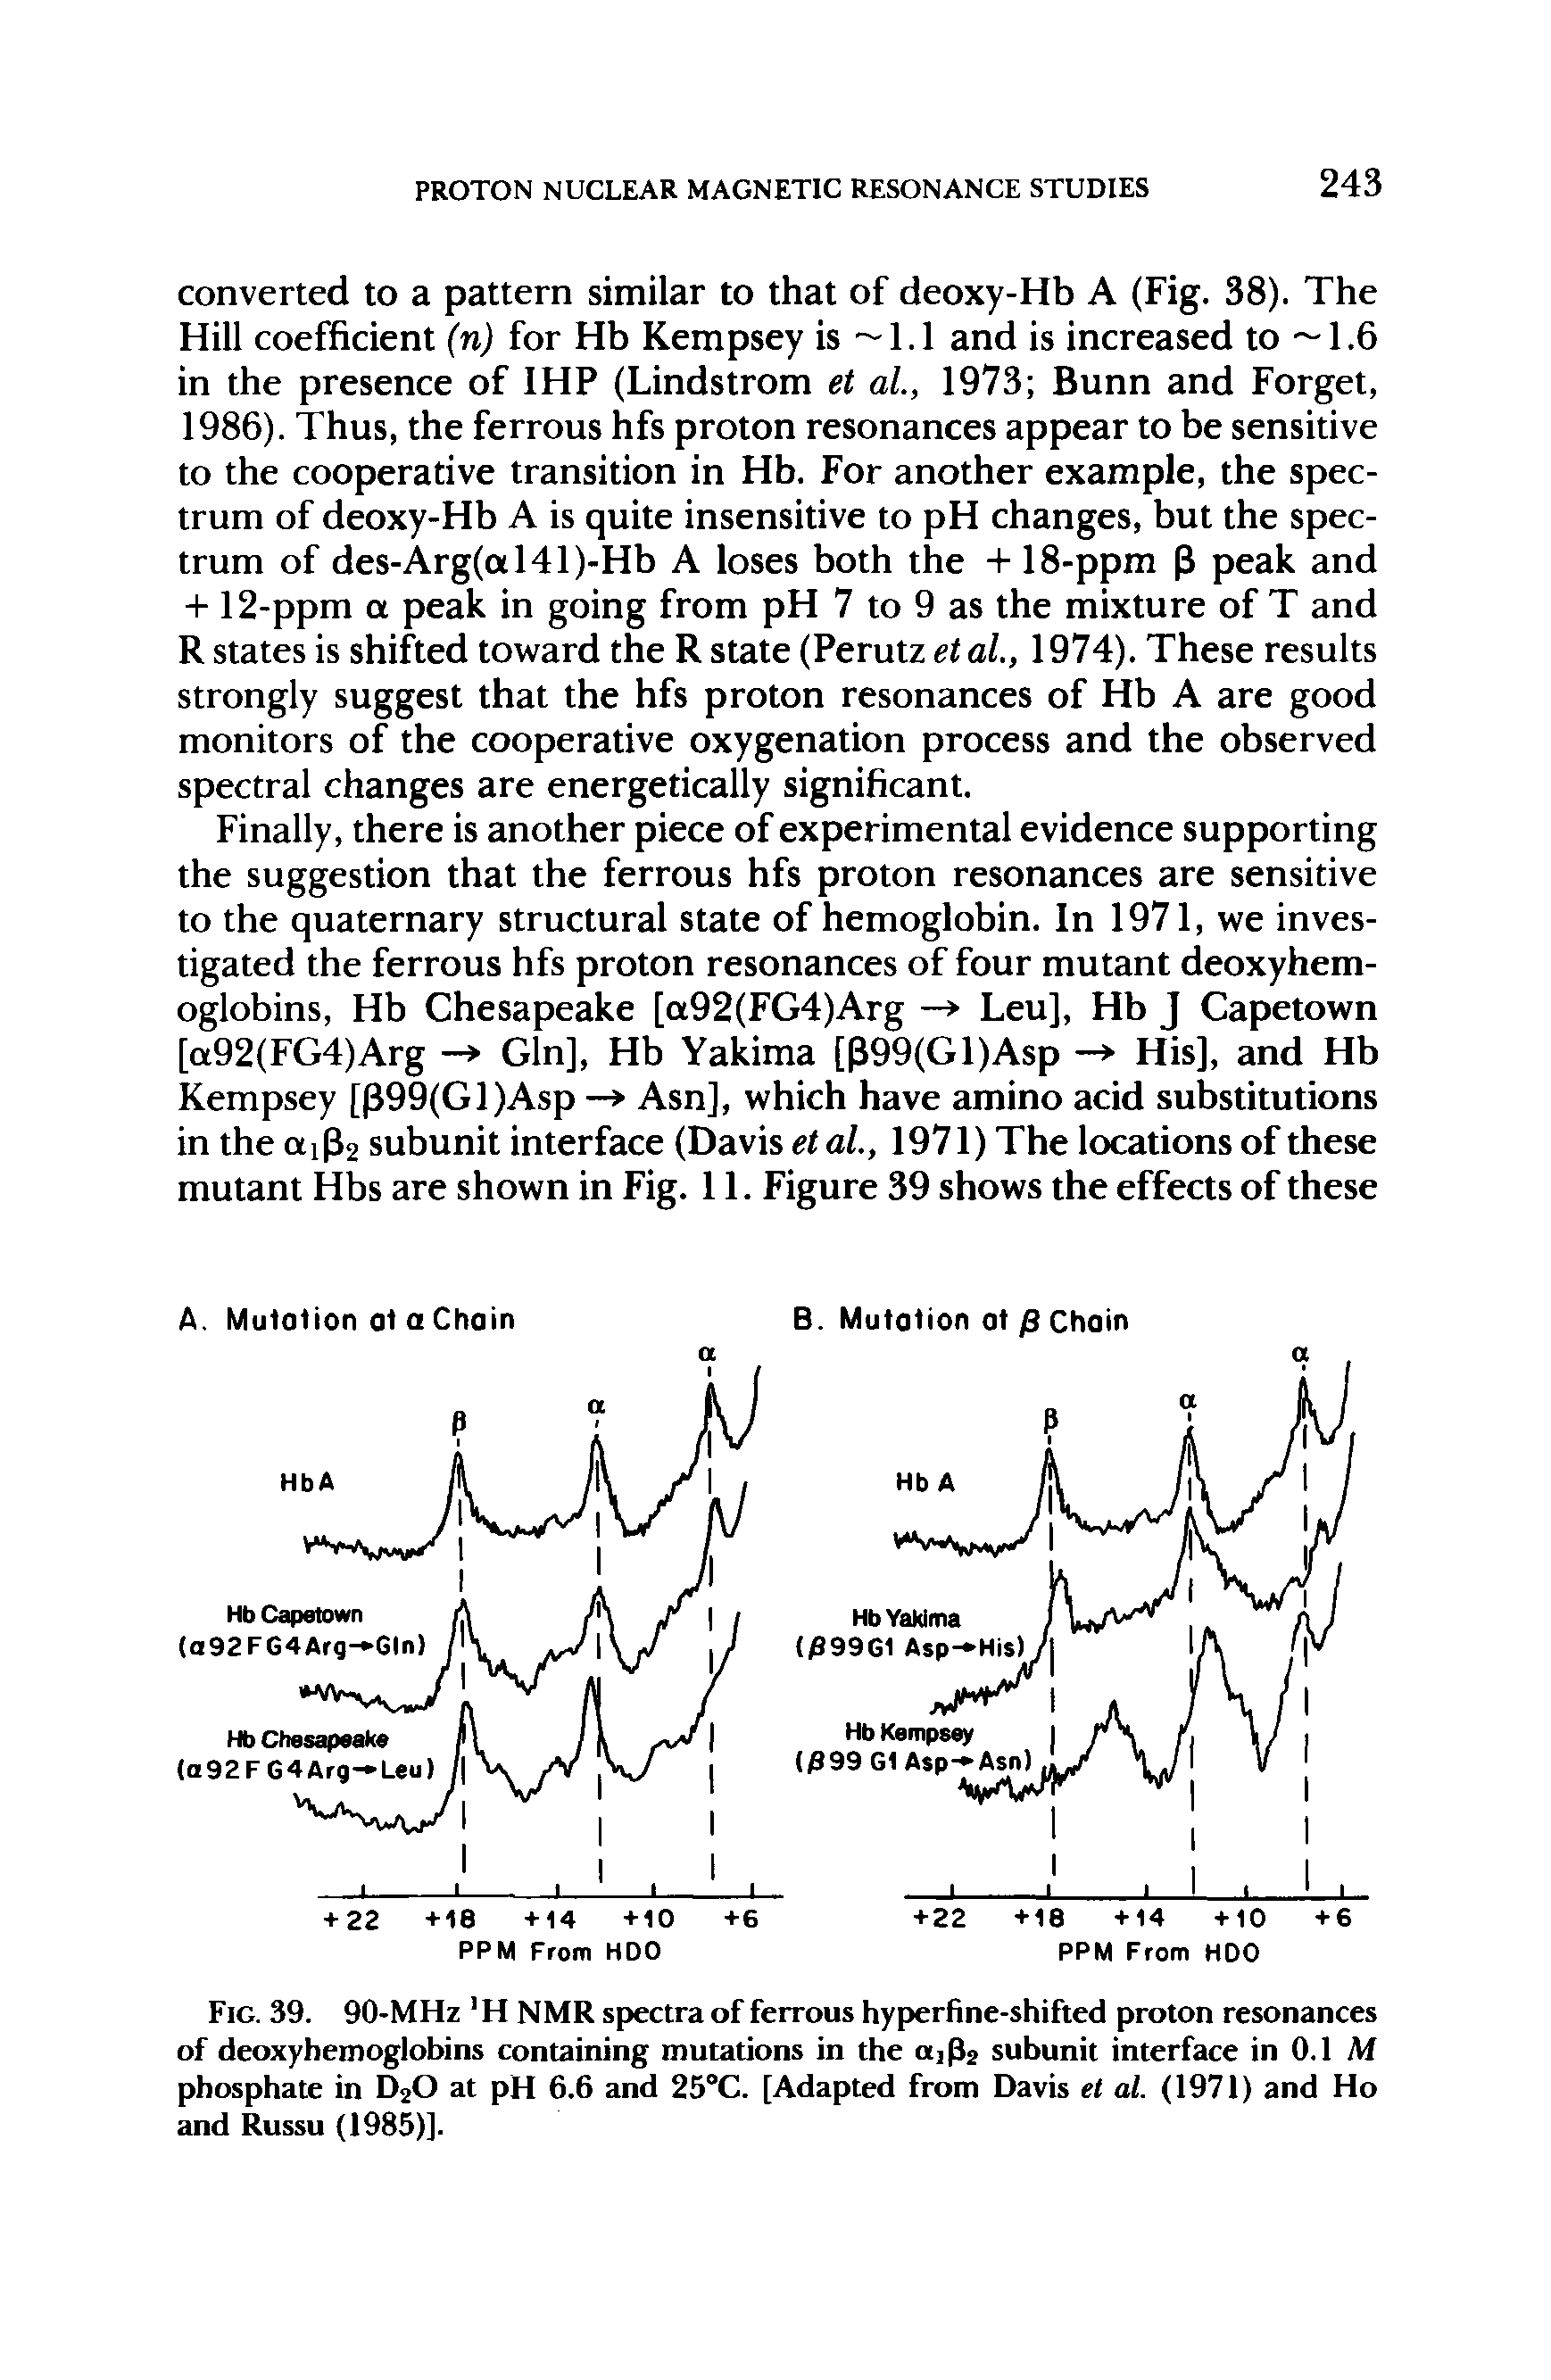 Fig. 39. 90-MHz H NMR spectra of ferrous hyperfine-shifted proton resonances of deoxyhemoglobins containing mutations in the a,(32 subunit interface in 0.1 Af phosphate in D20 at pH 6.6 and 25°C. [Adapted from Davis et al. (1971) and Ho and Russu (1985)].